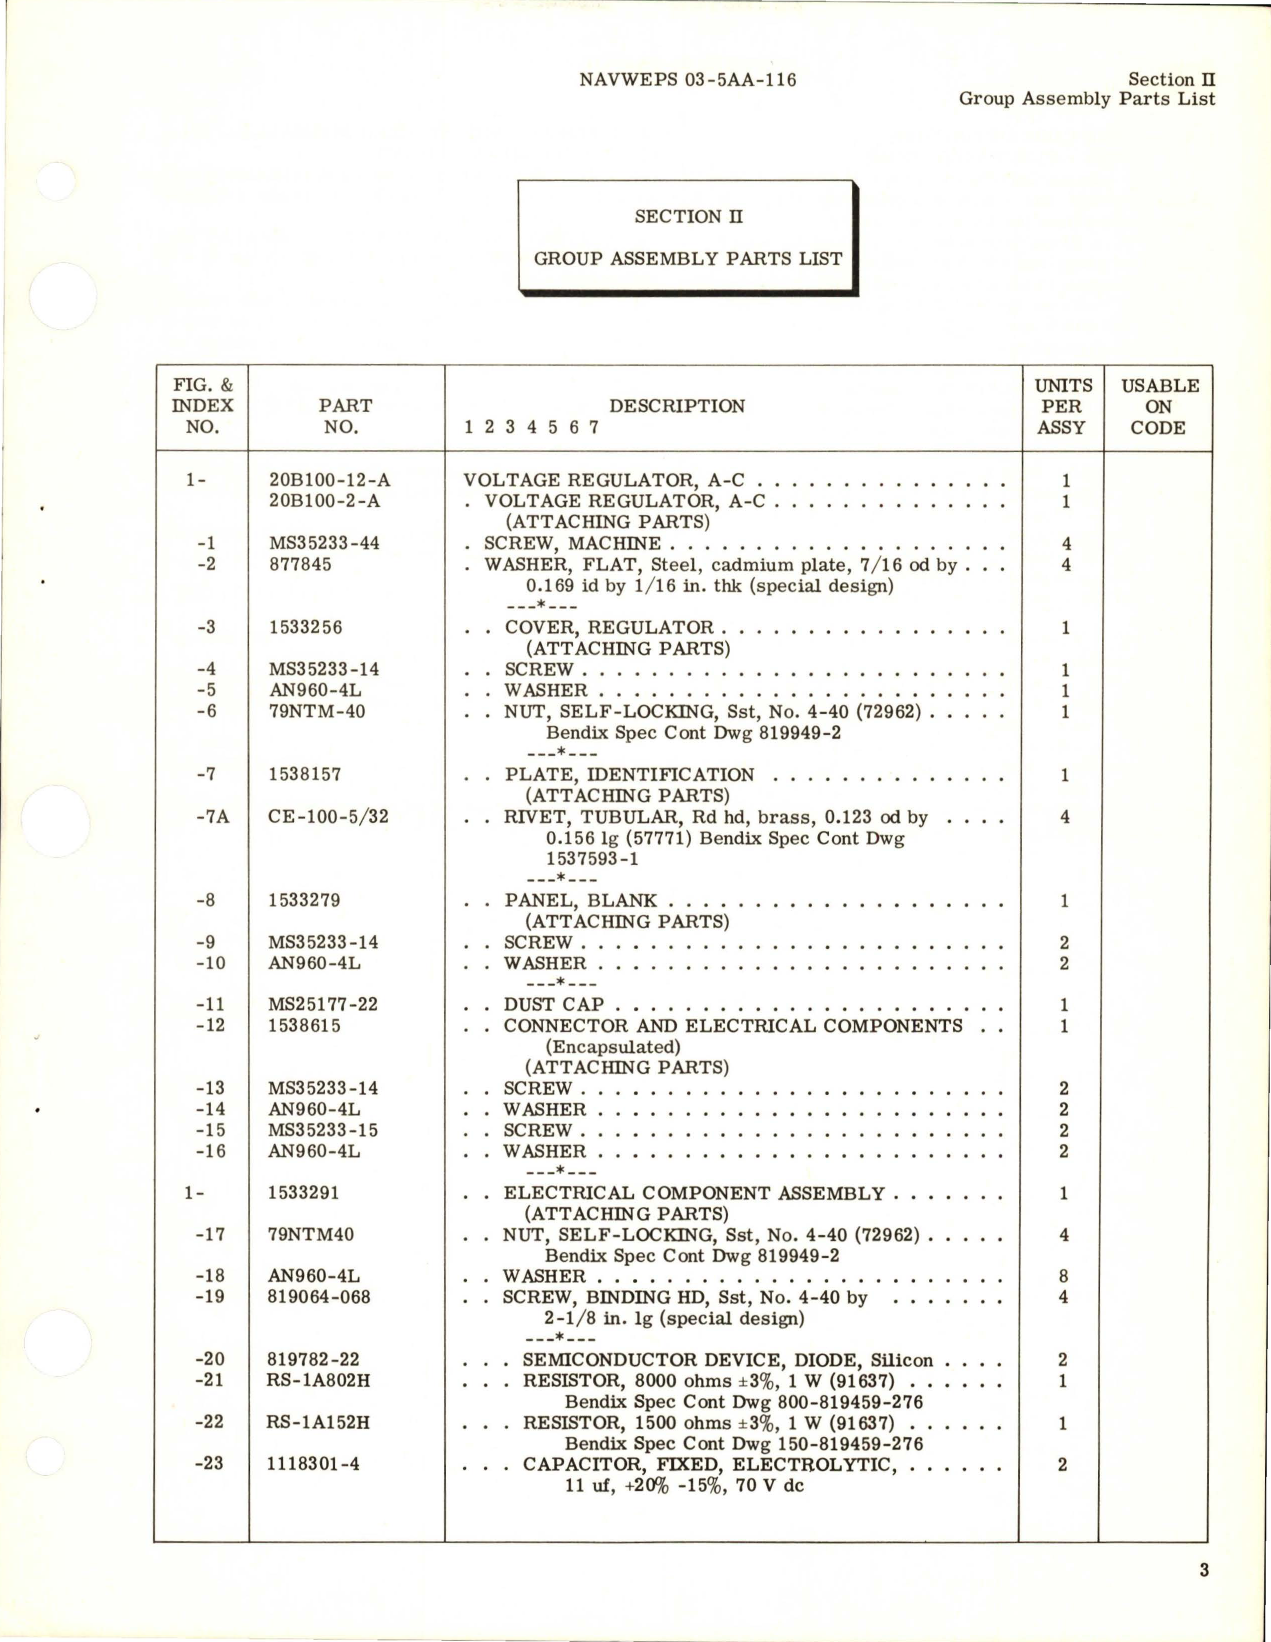 Sample page 5 from AirCorps Library document: Illustrated Parts Breakdown for A-C Voltage Regulator - Type 20B100-12-A